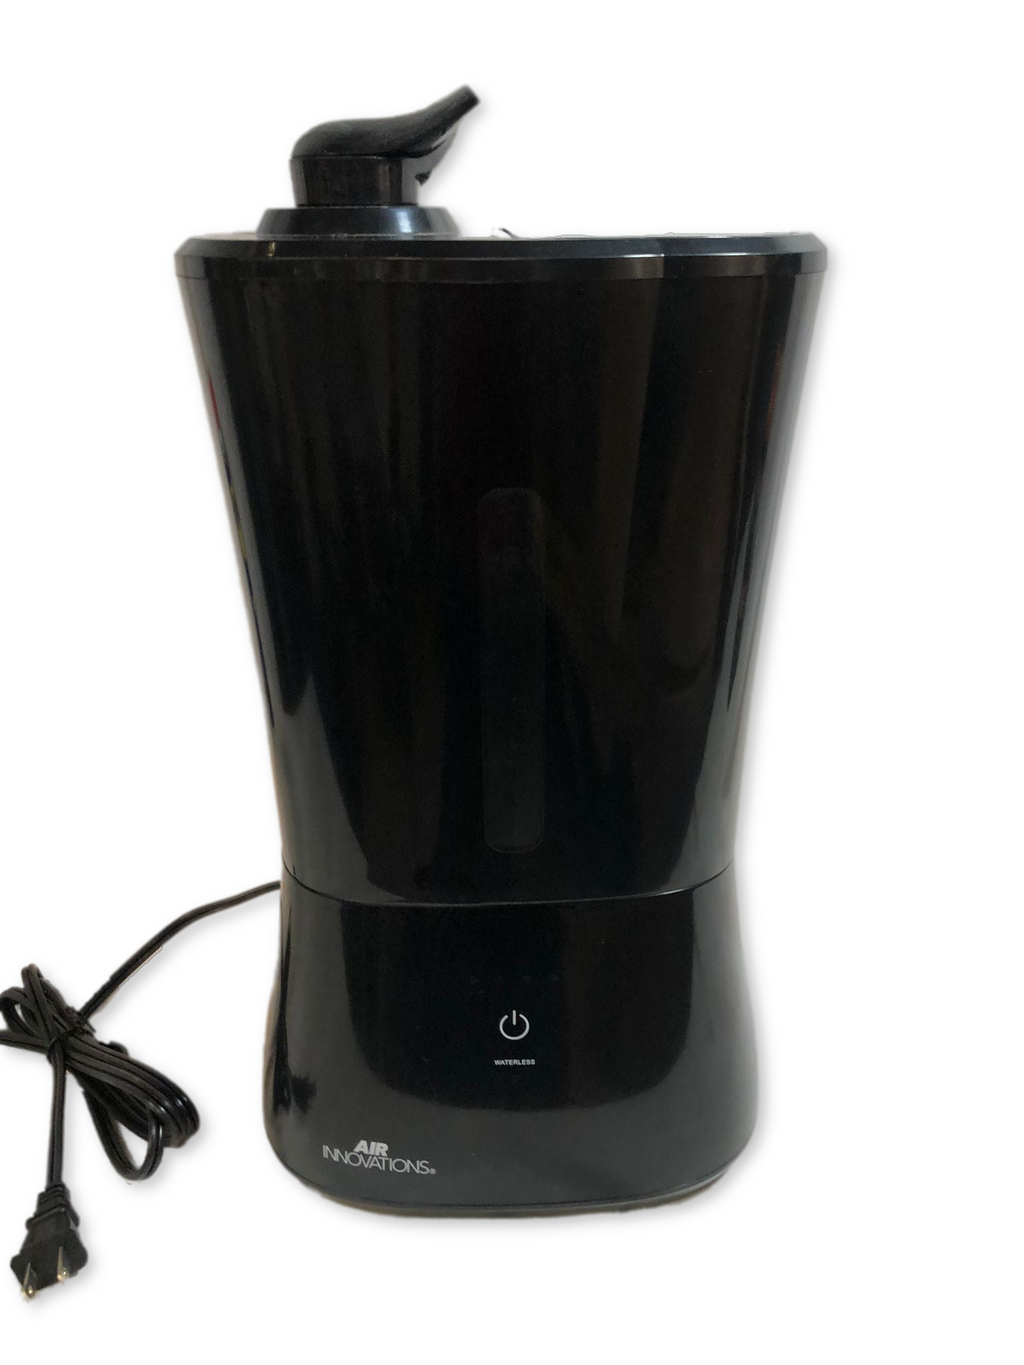 "As is" Air Innovations 1.3 Gallon Top Fill SensaTouch Humidifier